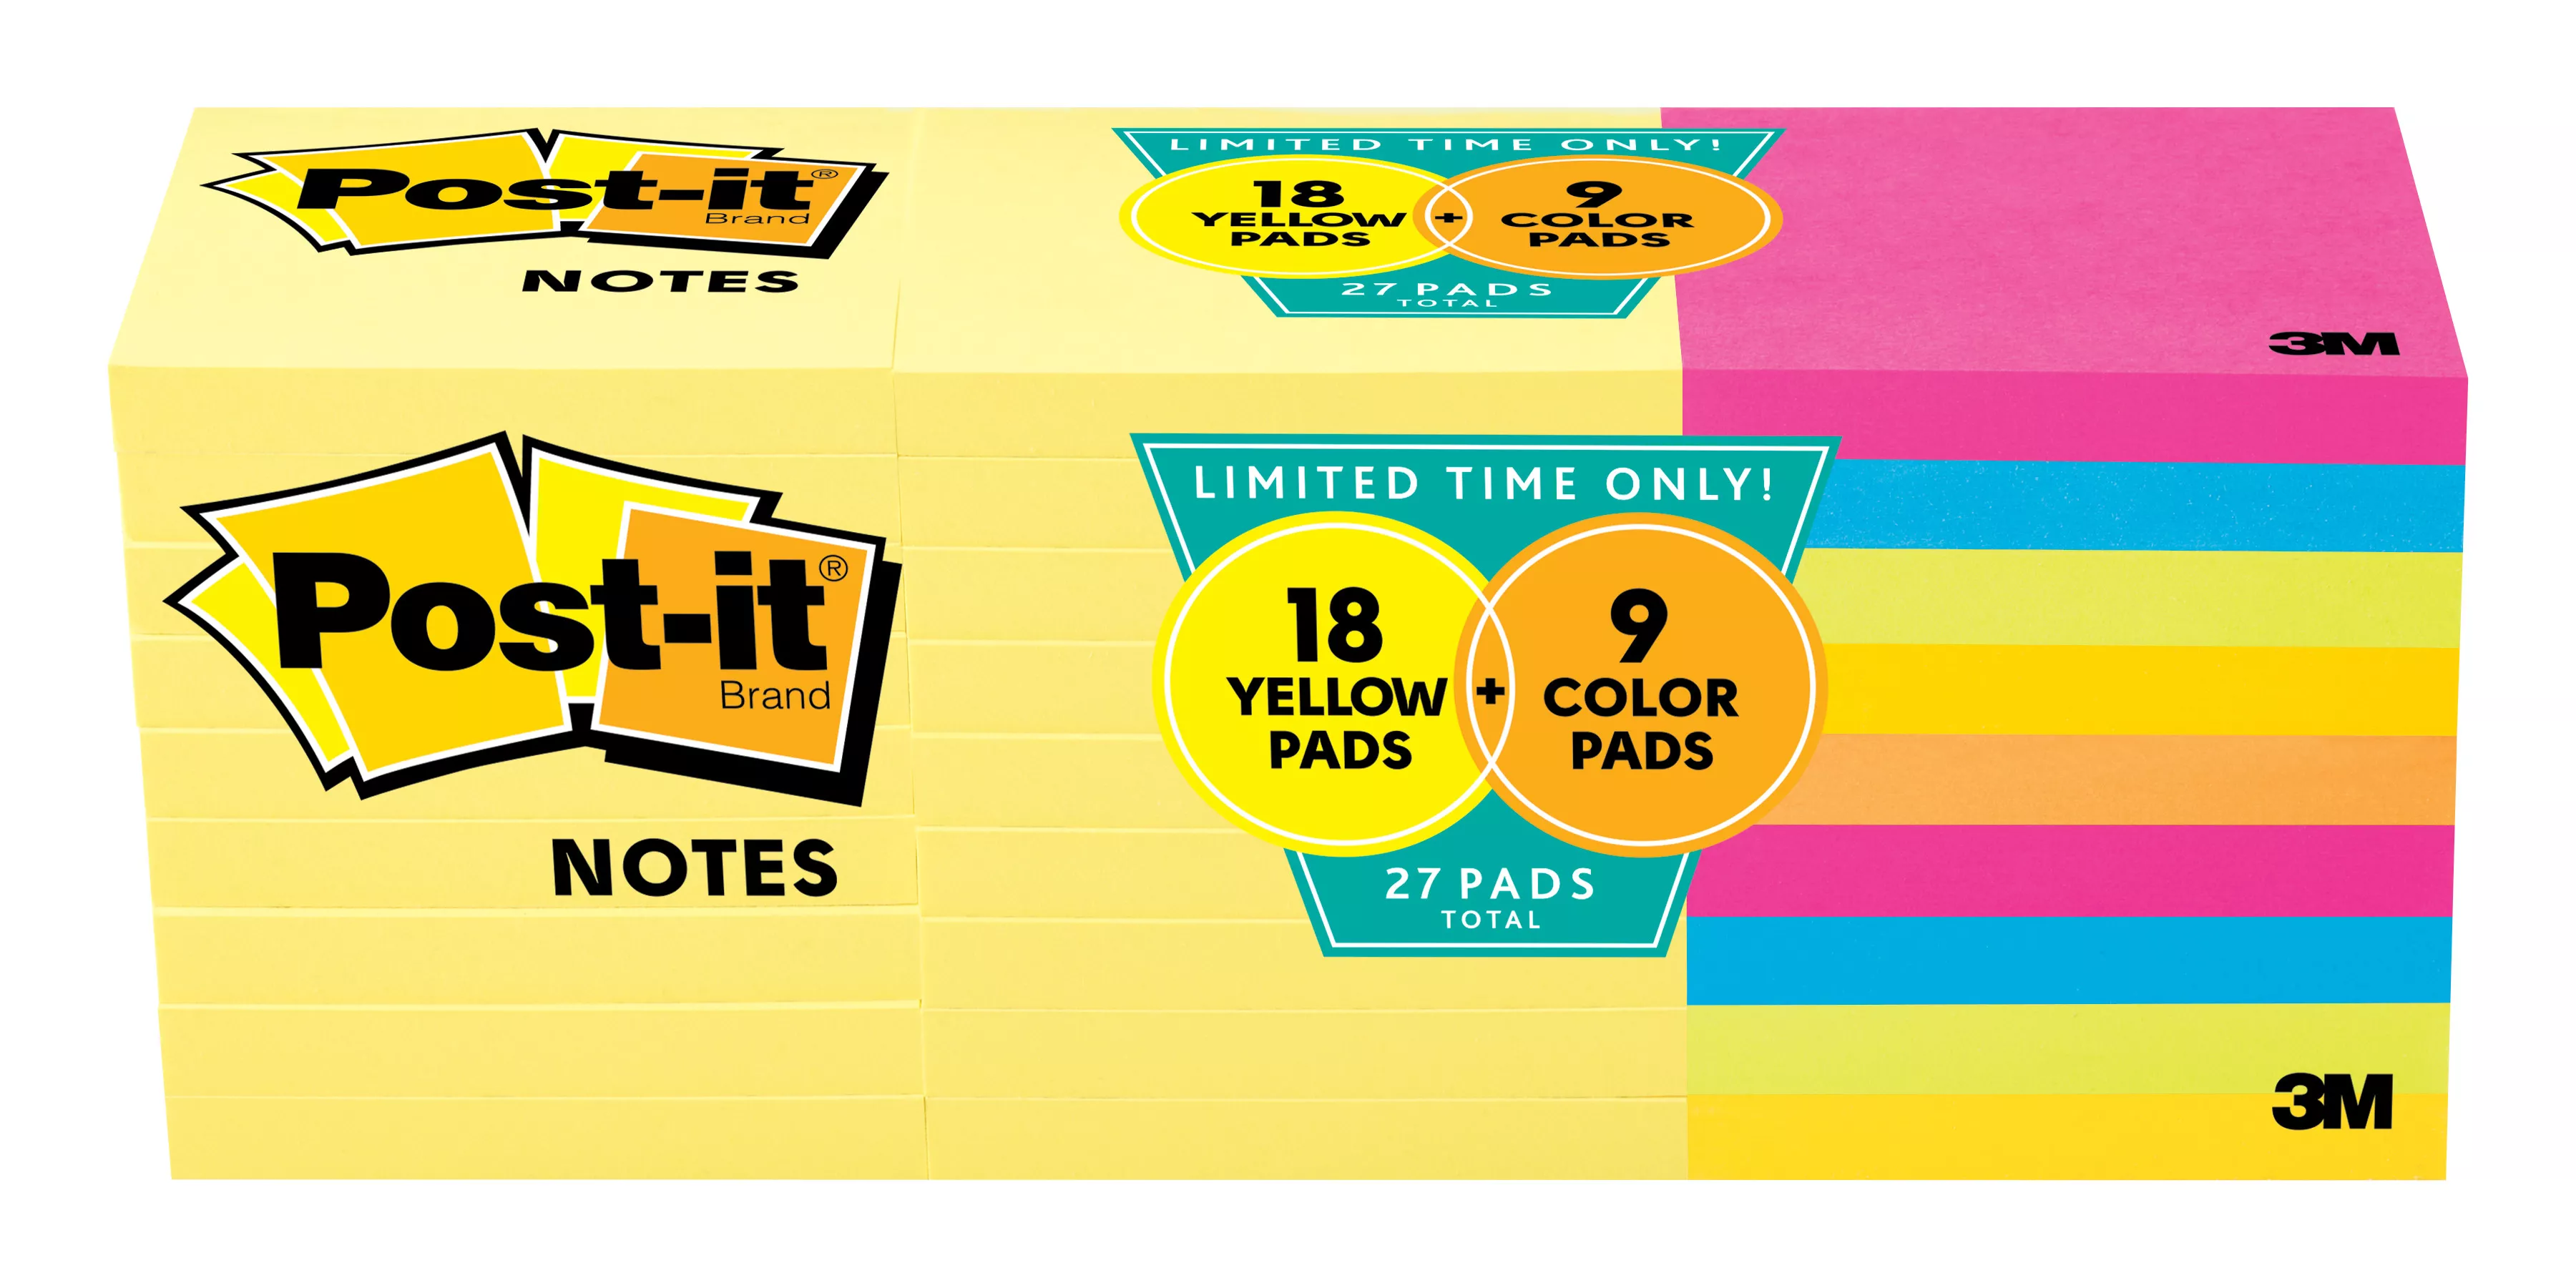 SKU 7100167790 | Post-it® Notes 654-2700-YW